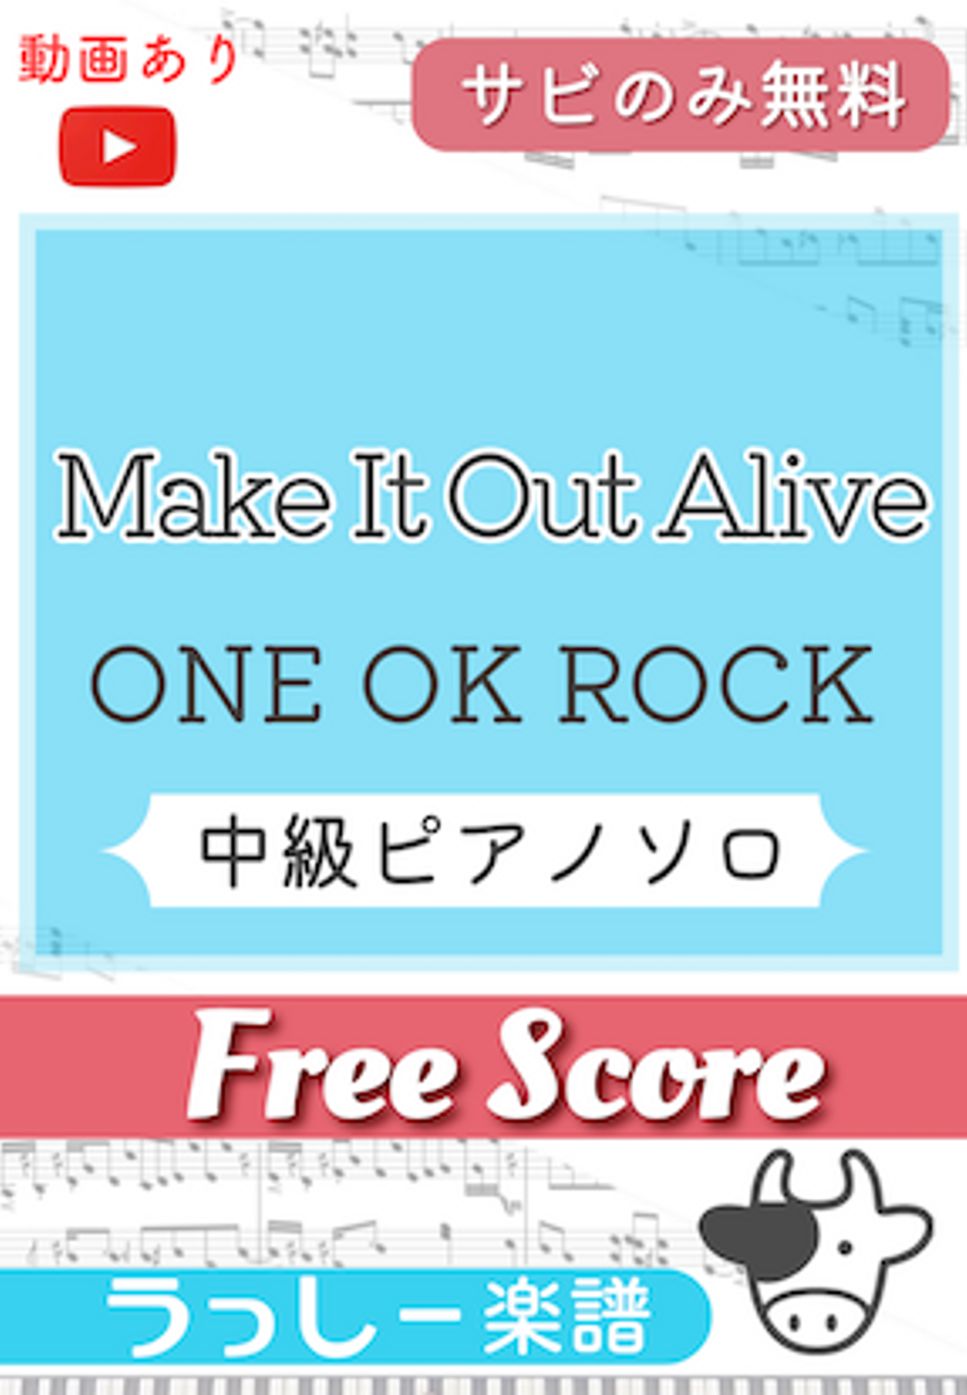 ONE OK ROCK - Make It Out Alive (サビのみ無料) by 牛武奏人